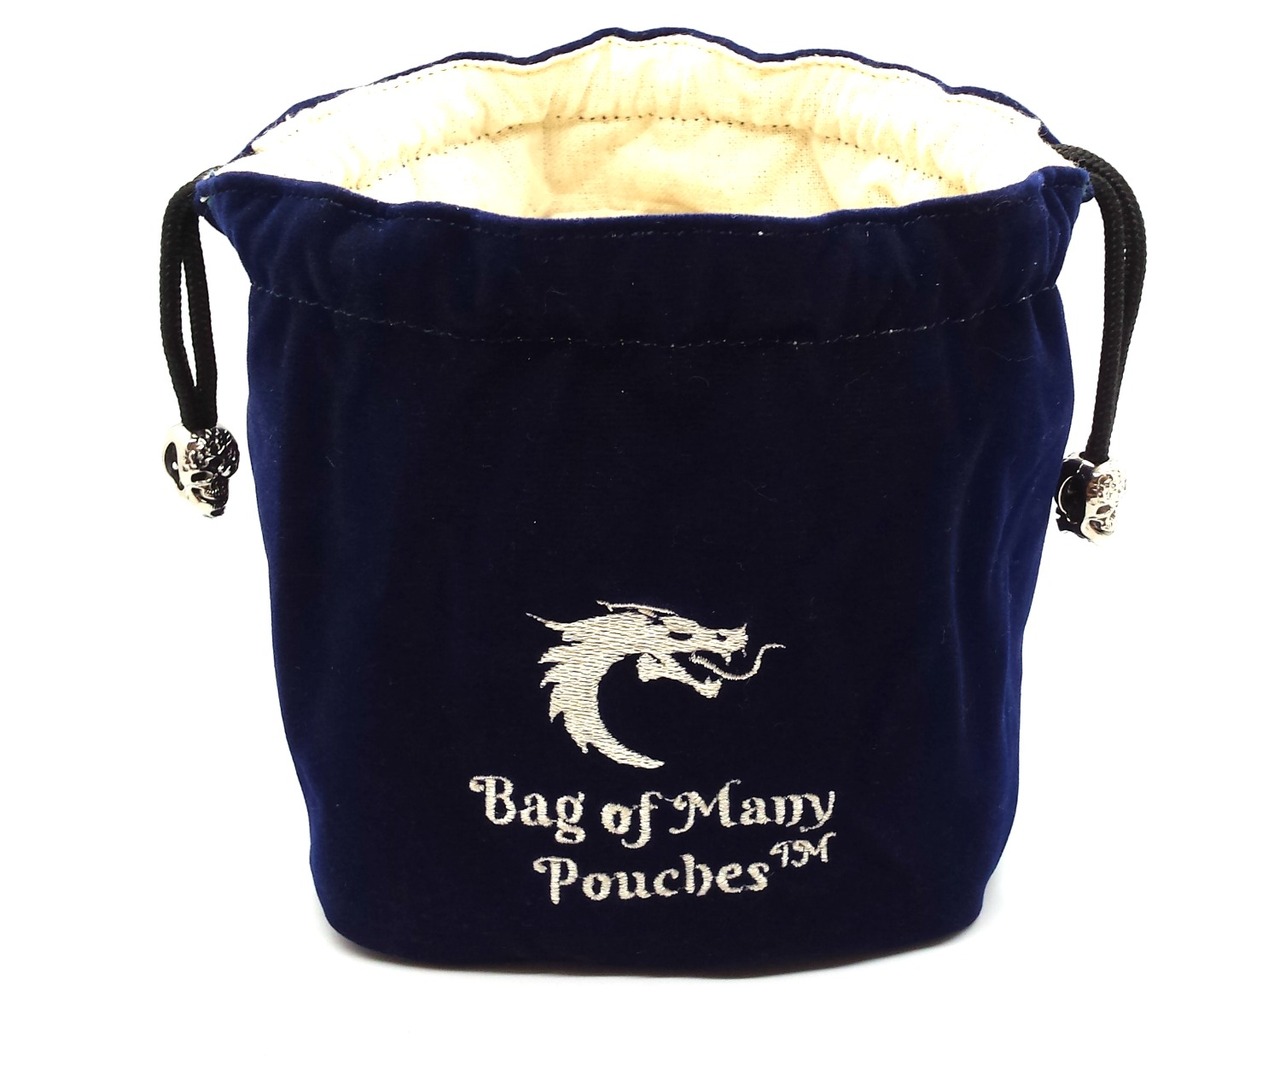 Old School - Bag of Many Pouches Blue Dice Bag